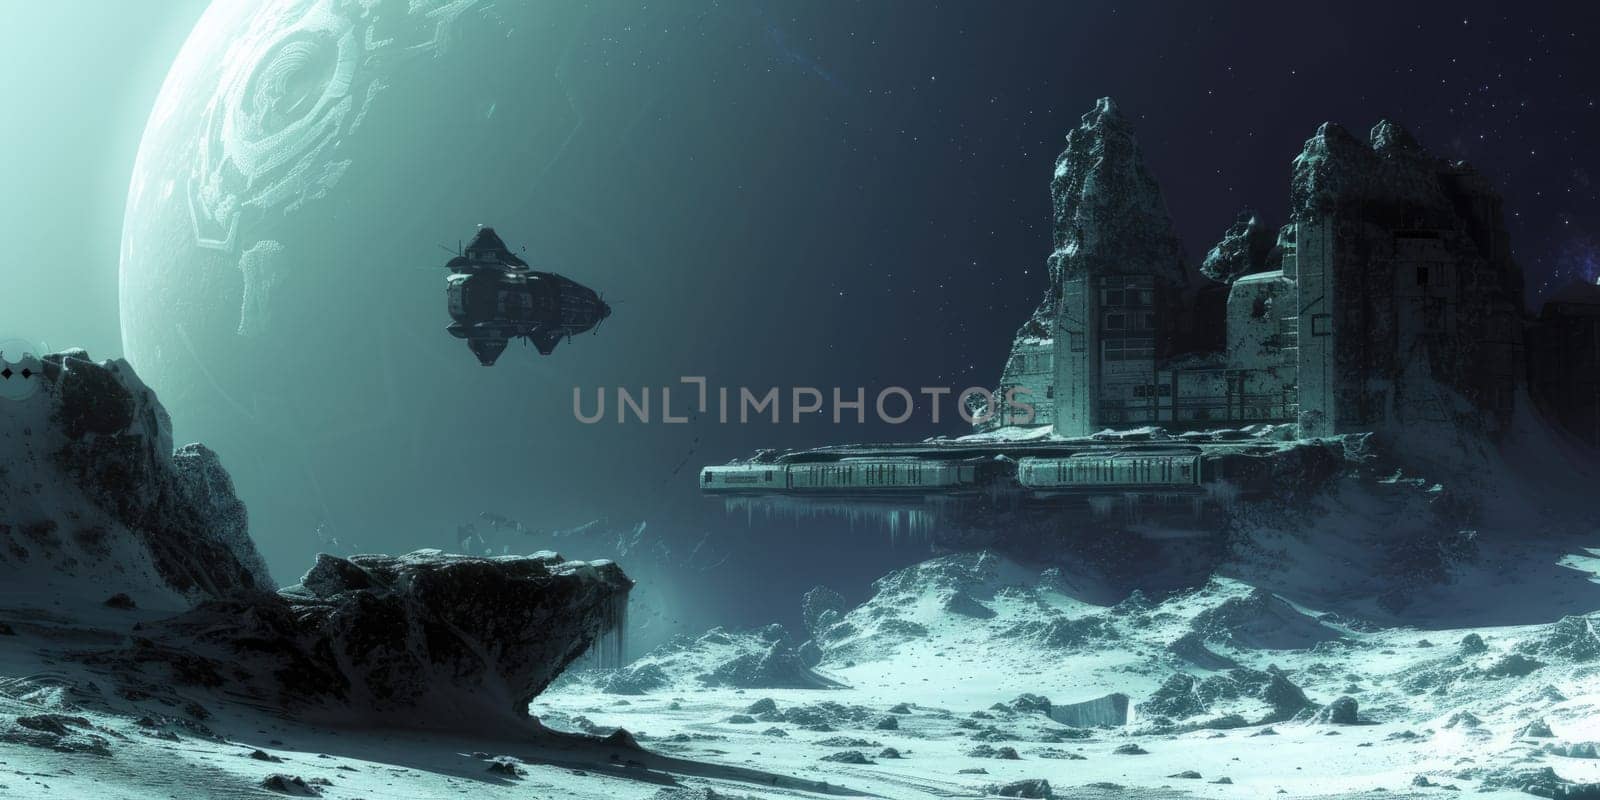 Futuristic Space Station on Icy Planet. Resplendent. by biancoblue